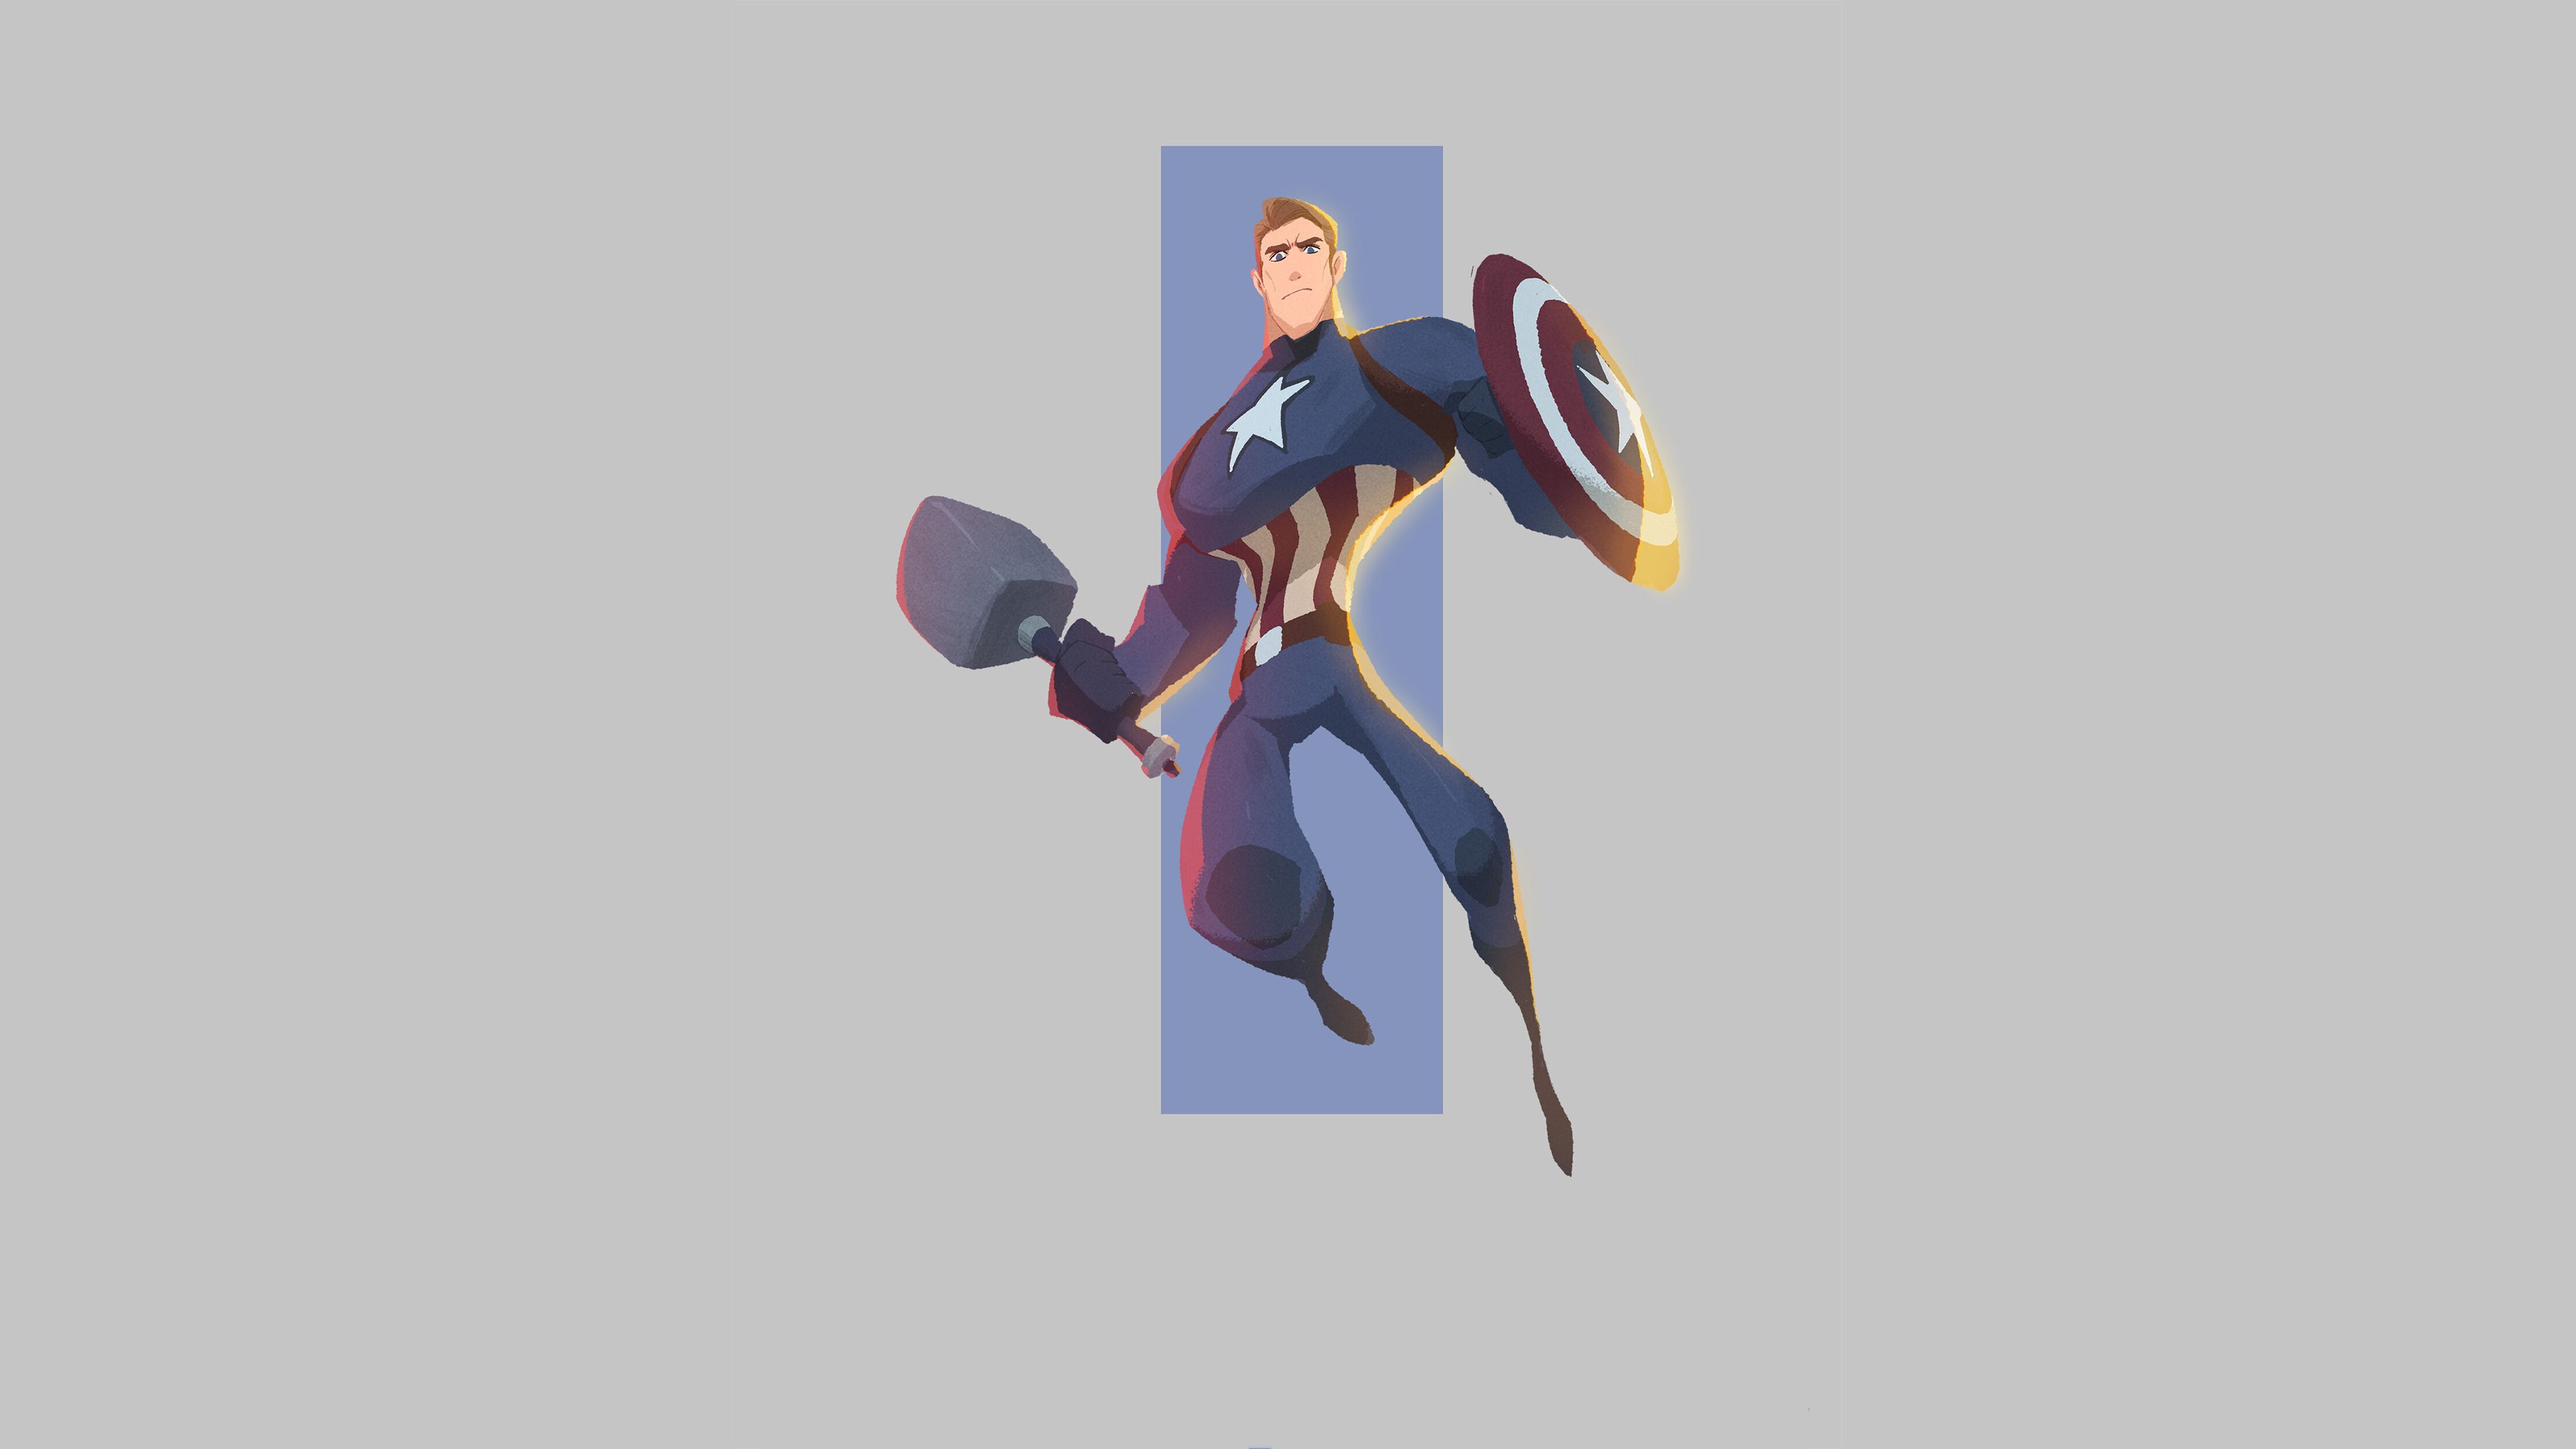 Captain America 4k Minimal Art, HD Superheroes, 4k Wallpaper, Image, Background, Photo and Picture